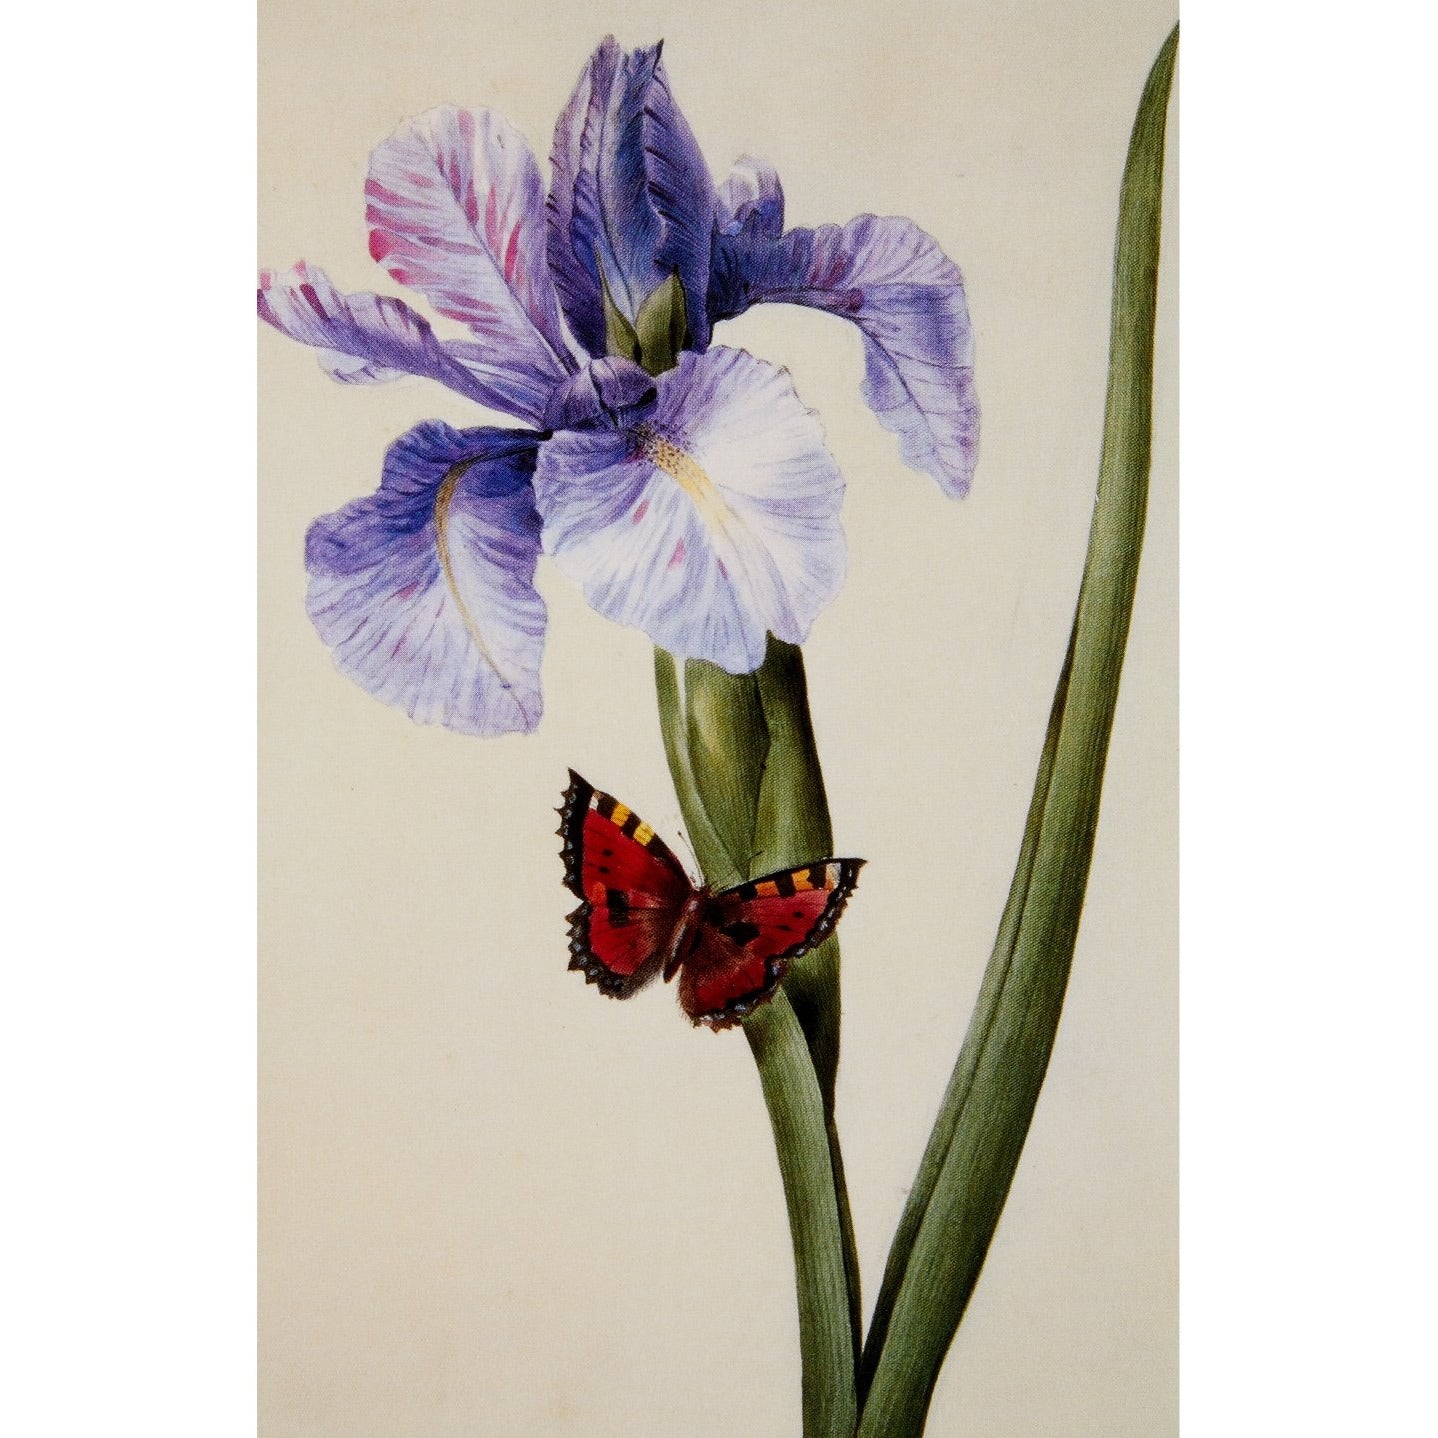 Notecard - Blue Iris and Butterfly (Spuria) by Louise D'Orleans. From the Broughton collection of The Fitzwilliam Museum, brought to you by CuratingCambridge.com